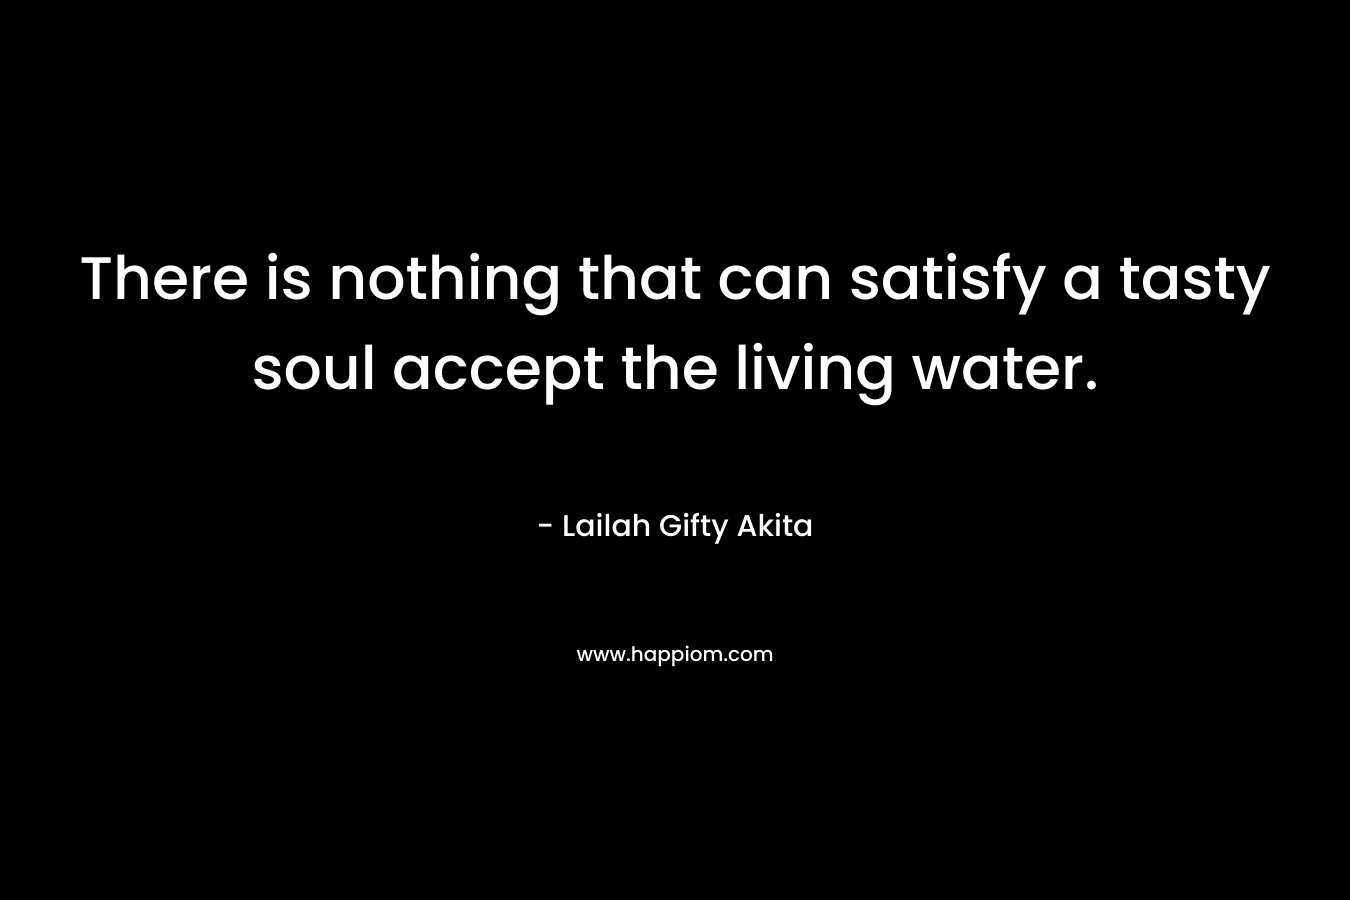 There is nothing that can satisfy a tasty soul accept the living water. – Lailah Gifty Akita